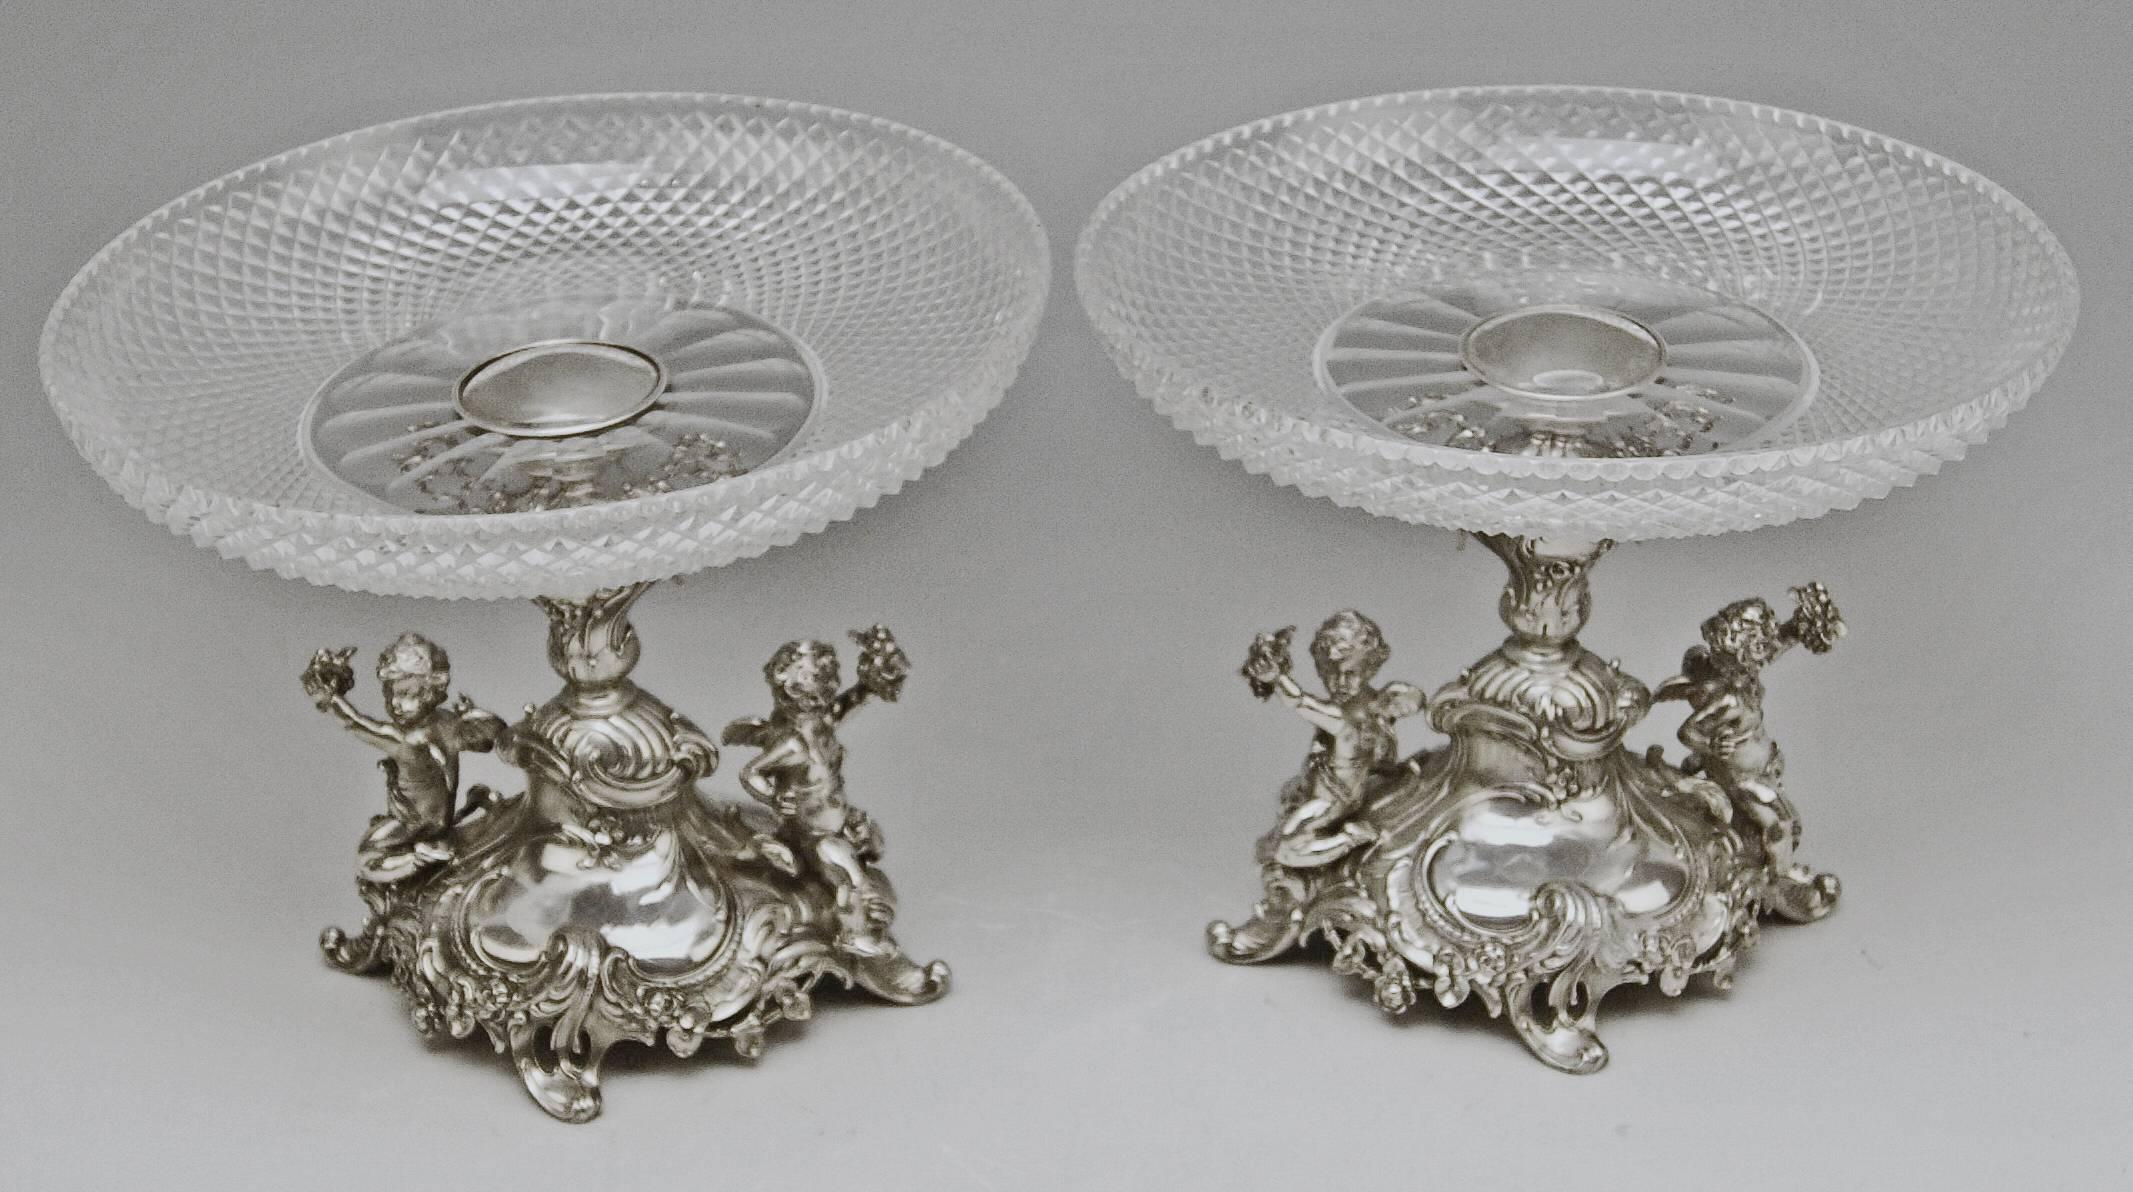 Silver German pair of centrepieces / centerpieces with original glass platters, made by Bruckmann and Sons (GERMANY).

Style of Historicism (made circa 1890)
Silver 800
branded by German Crescent with Crown
Austrian Silver Import Sign existing,